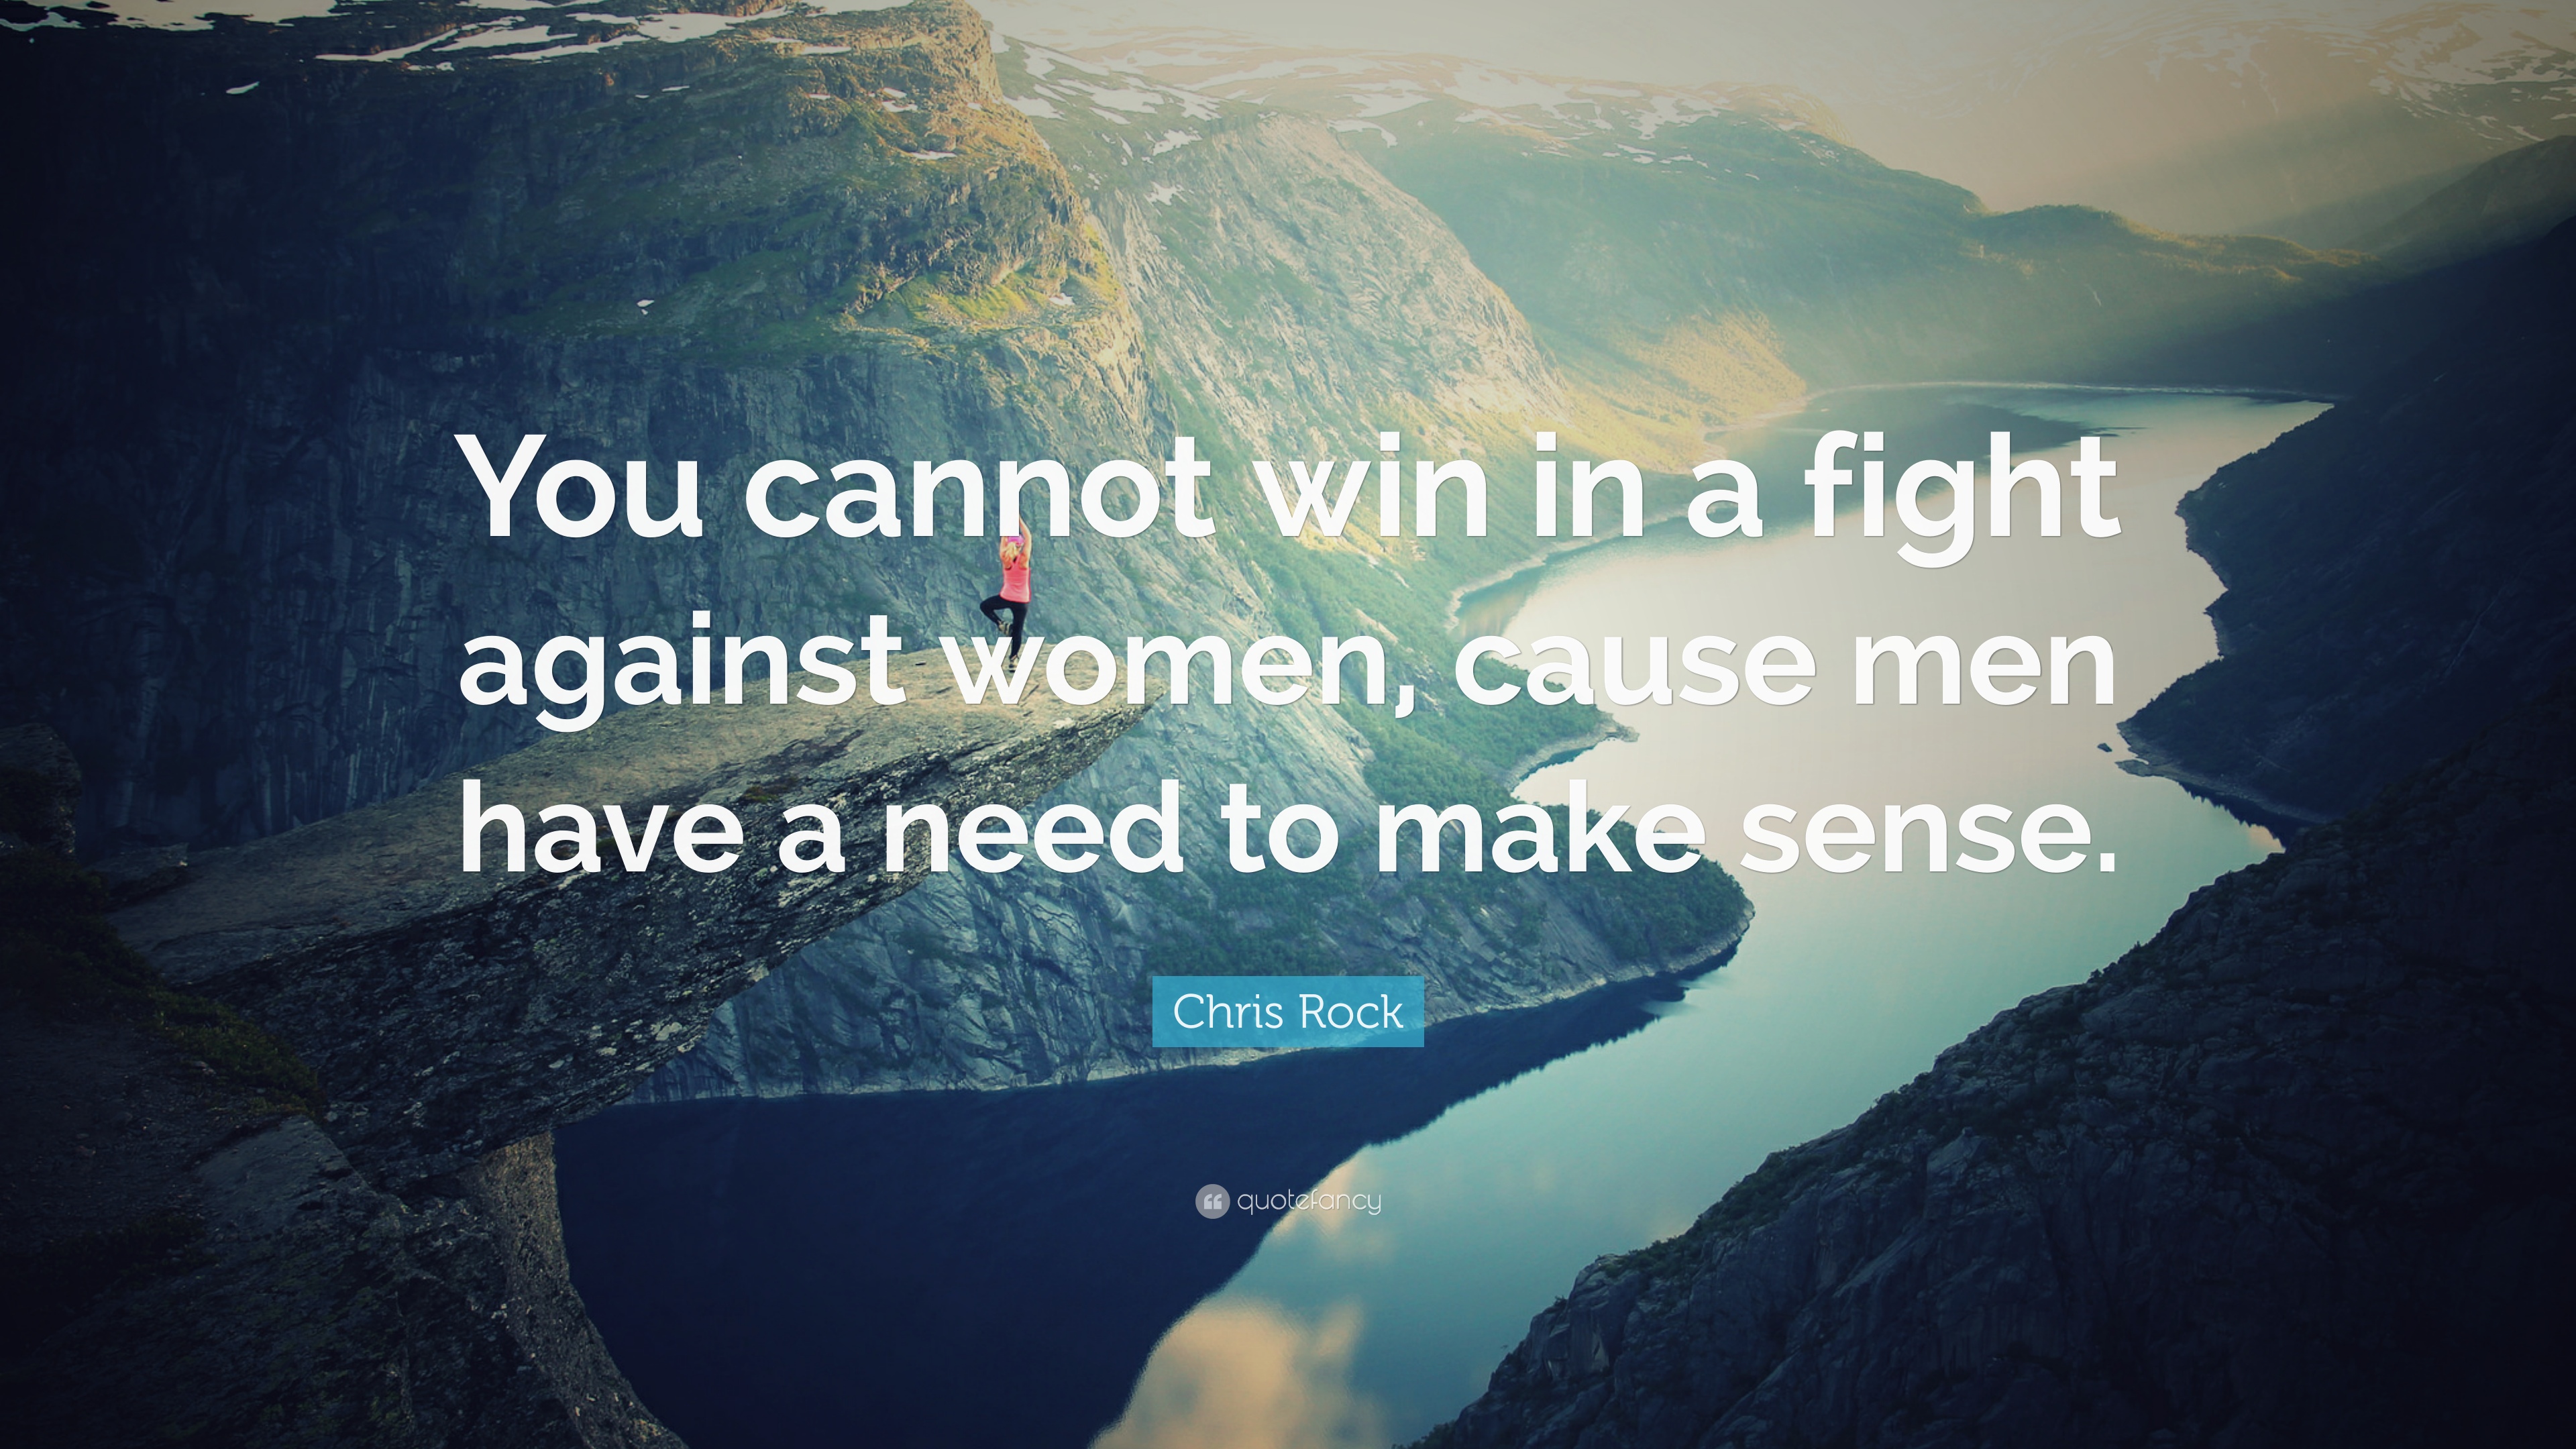 Chris Rock Quote: “You cannot win in a fight against women, cause men have a need to make sense.” (10 wallpaper)